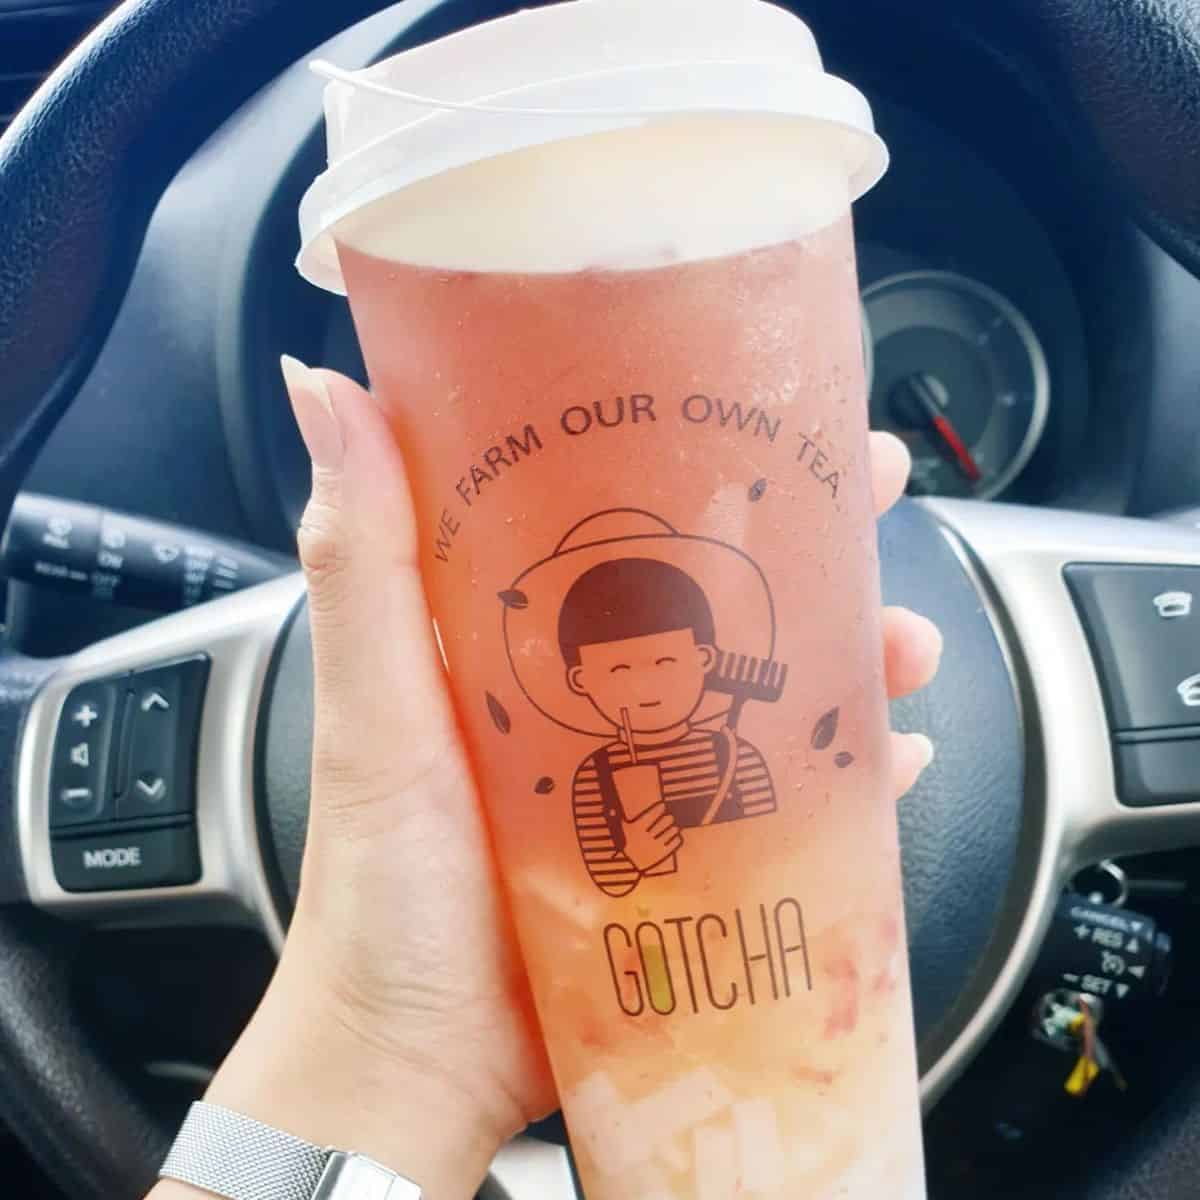  A cold cup of strawberry green tea with lychee jelly